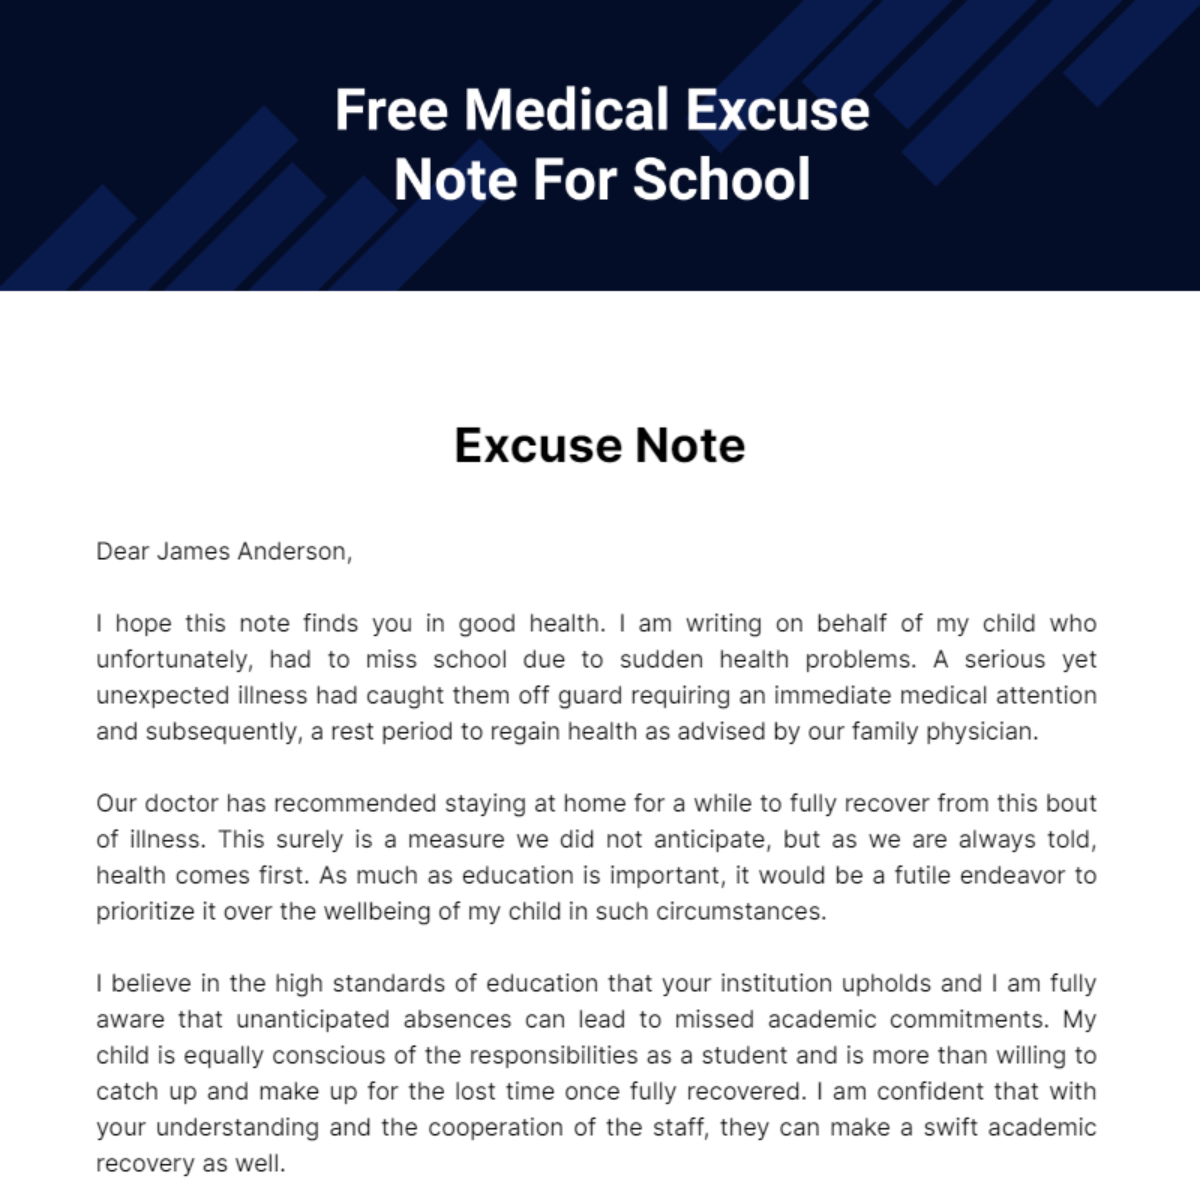 Medical Excuse Note For School Template